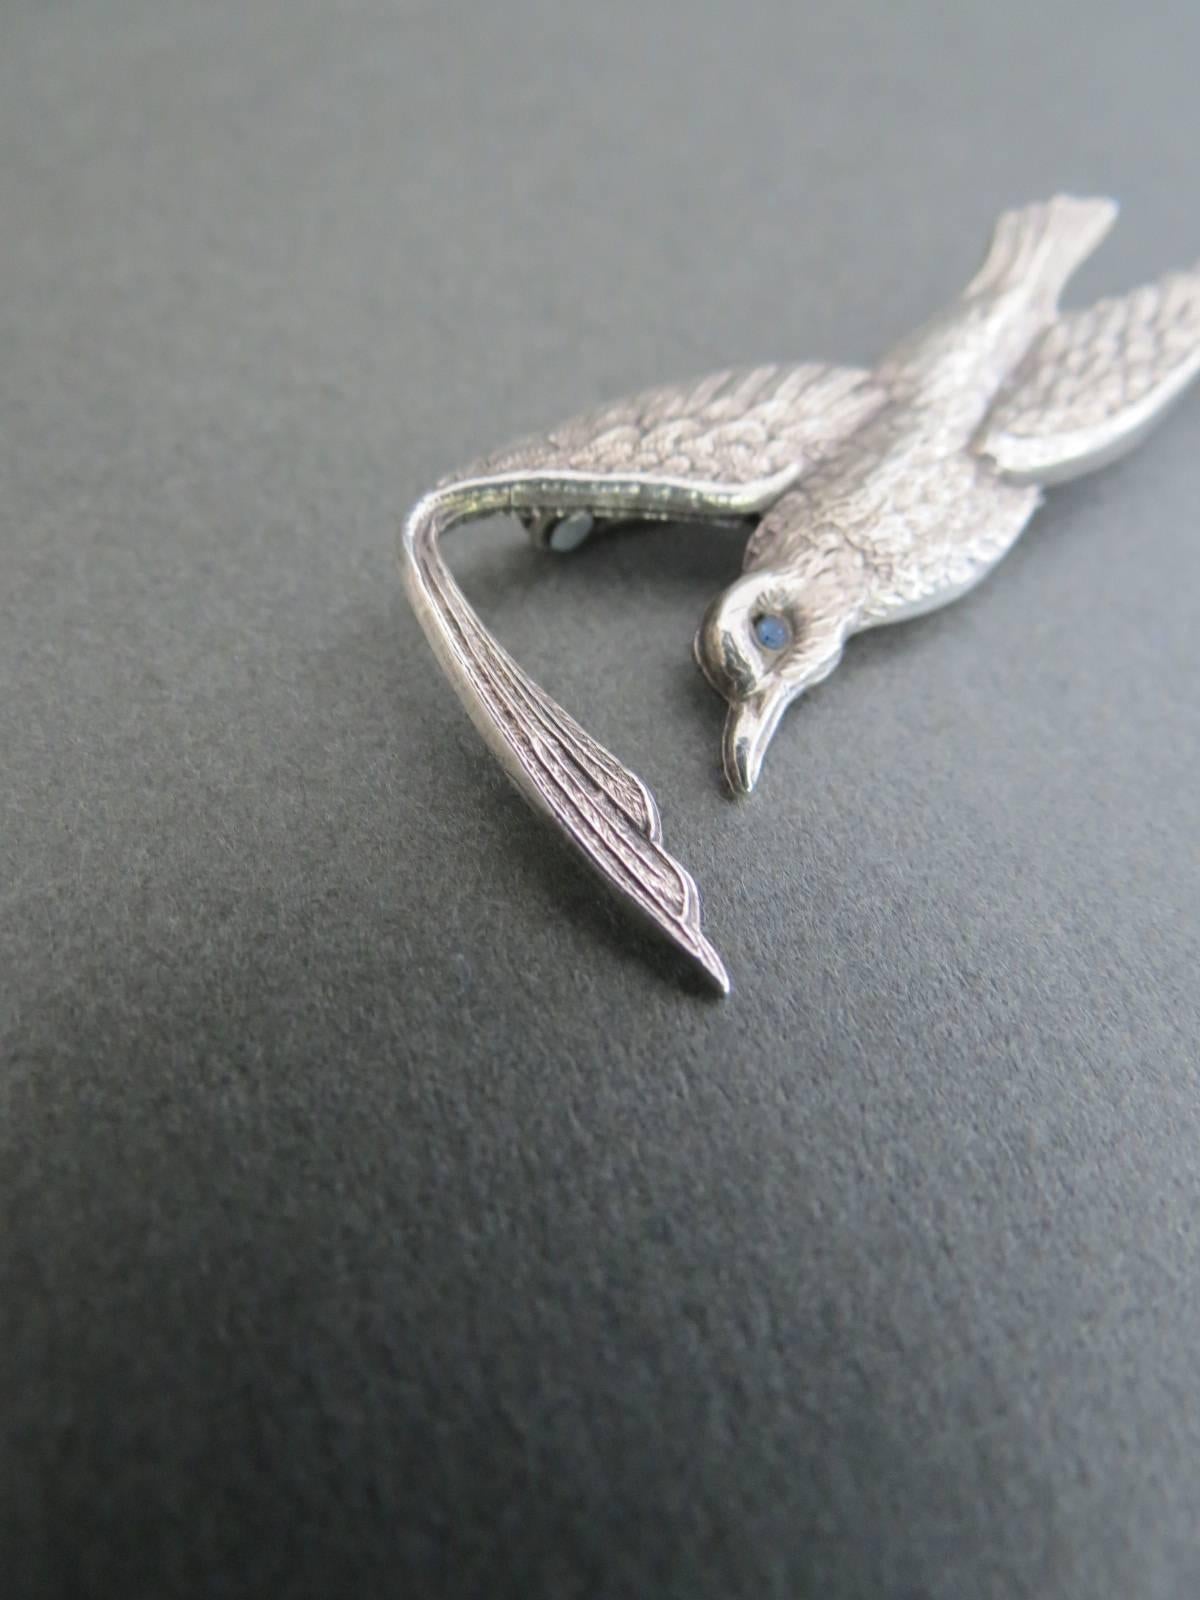 Vintage Aquamarine paste and Solid Silver Bird Brooch Pin.
Item Specifics
Height: 7cm (approx 2.50